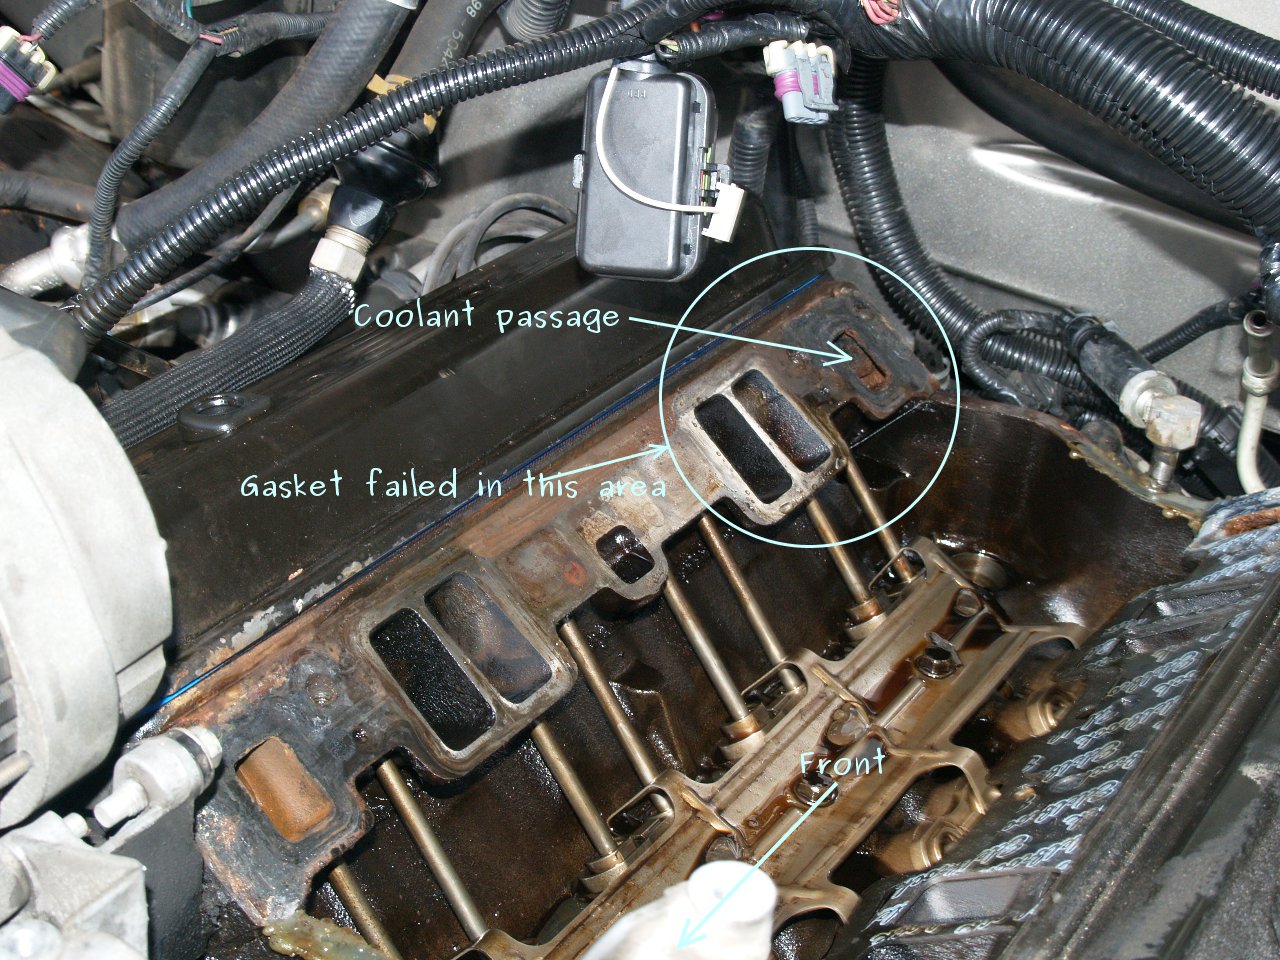 See C260C in engine